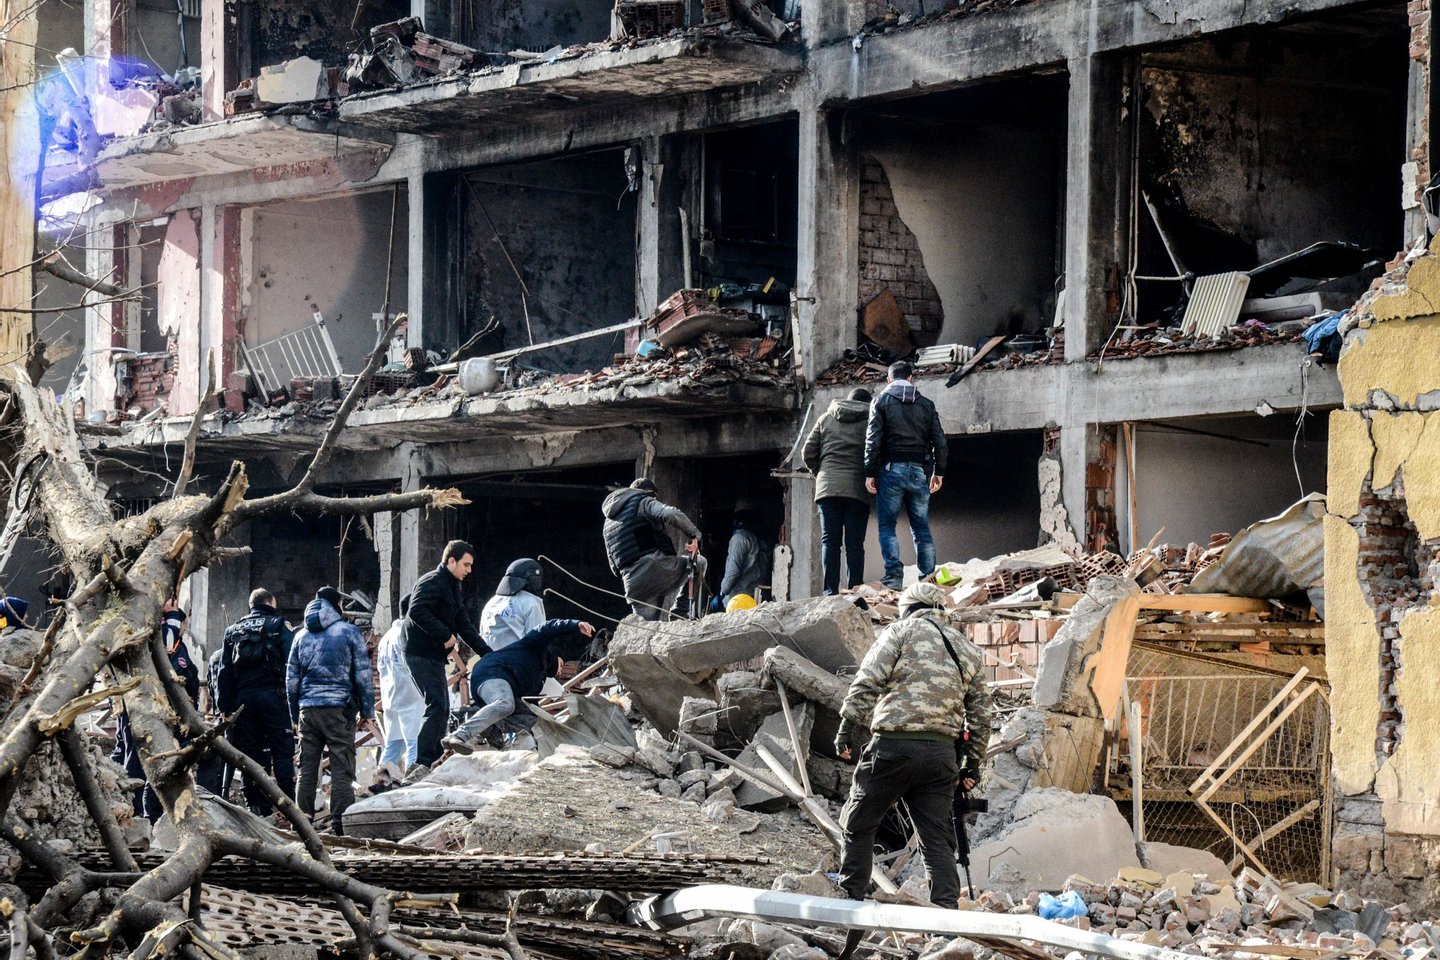 Turkish police search through the wreckage of a blast damaged building on January 14, 2016 in Diyarbakir. Six people died and 39 others were wounded in a car bomb attack blamed on Kurdish rebels that ripped through a police station and an adjacent housing complex for officers and their families in southeastern Turkey, security forces said Thursday, updating an earlier toll of five. / AFP / ILYAS AKENGIN        (Photo credit should read ILYAS AKENGIN/AFP/Getty Images)